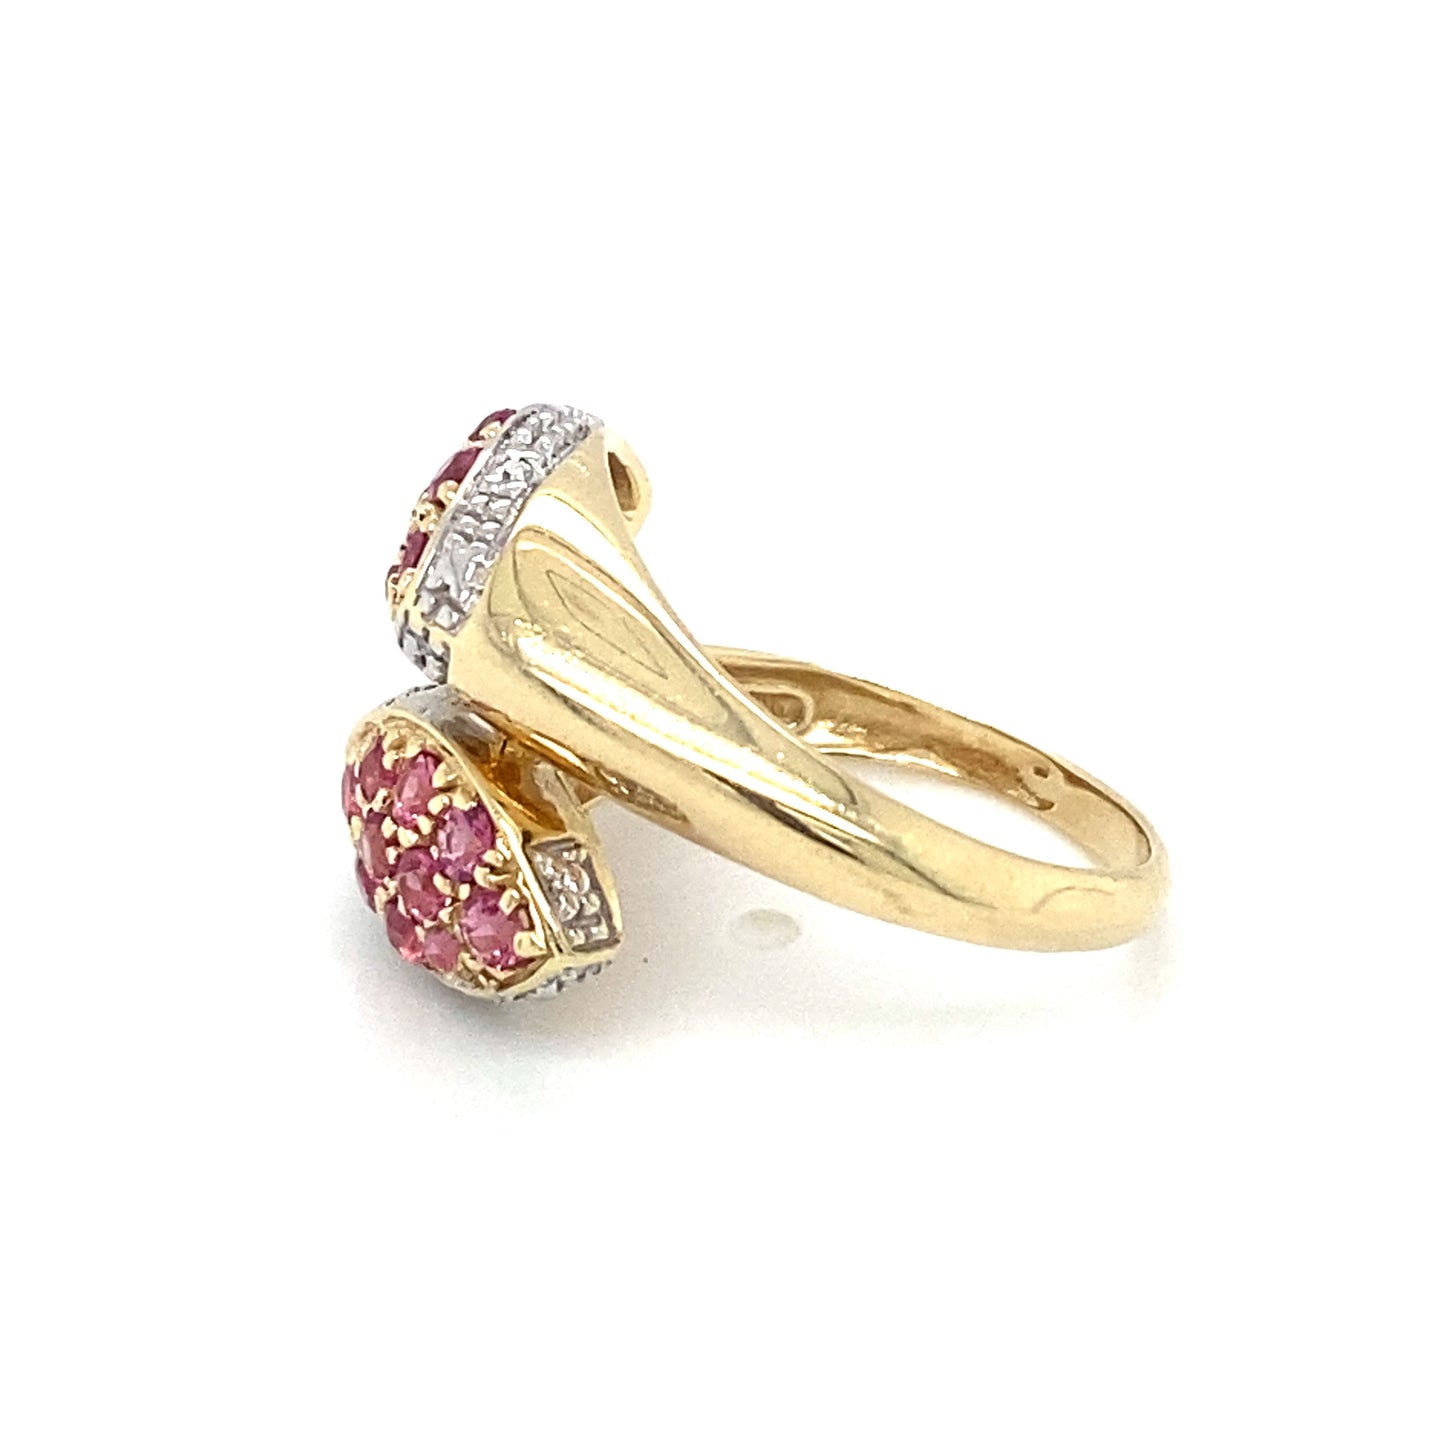 Circa 2000s Pink Sapphire and Diamond Bypass Ring in 14K Gold